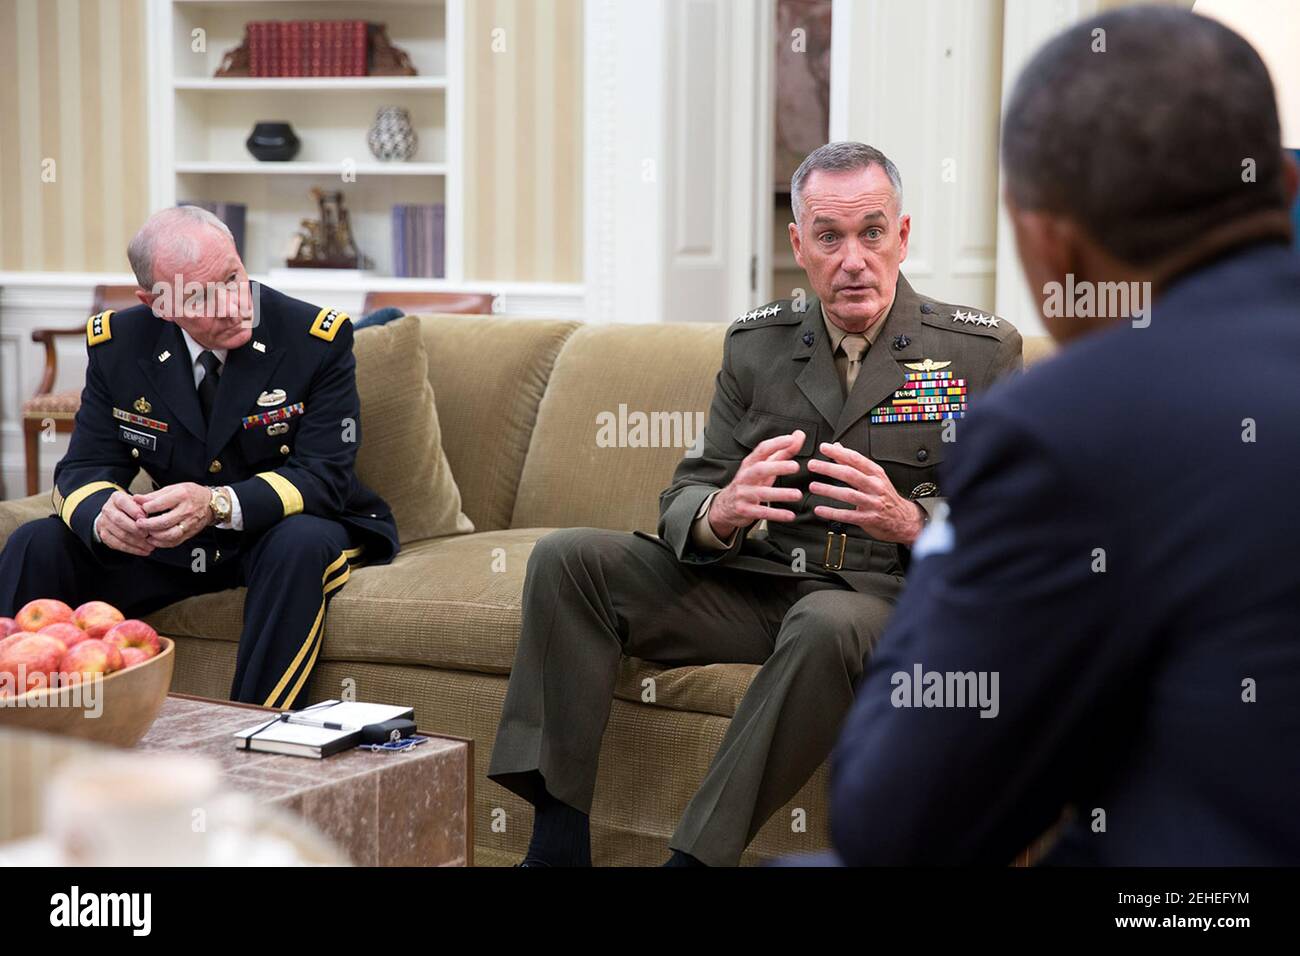 President Barack Obama meets with Gen. Joseph F. Dunford, Jr. and Gen. Martin Dempsey, Chairman of the Joint Chiefs of Staff, left, in the Oval Office, Sept. 30, 2014. Stock Photo